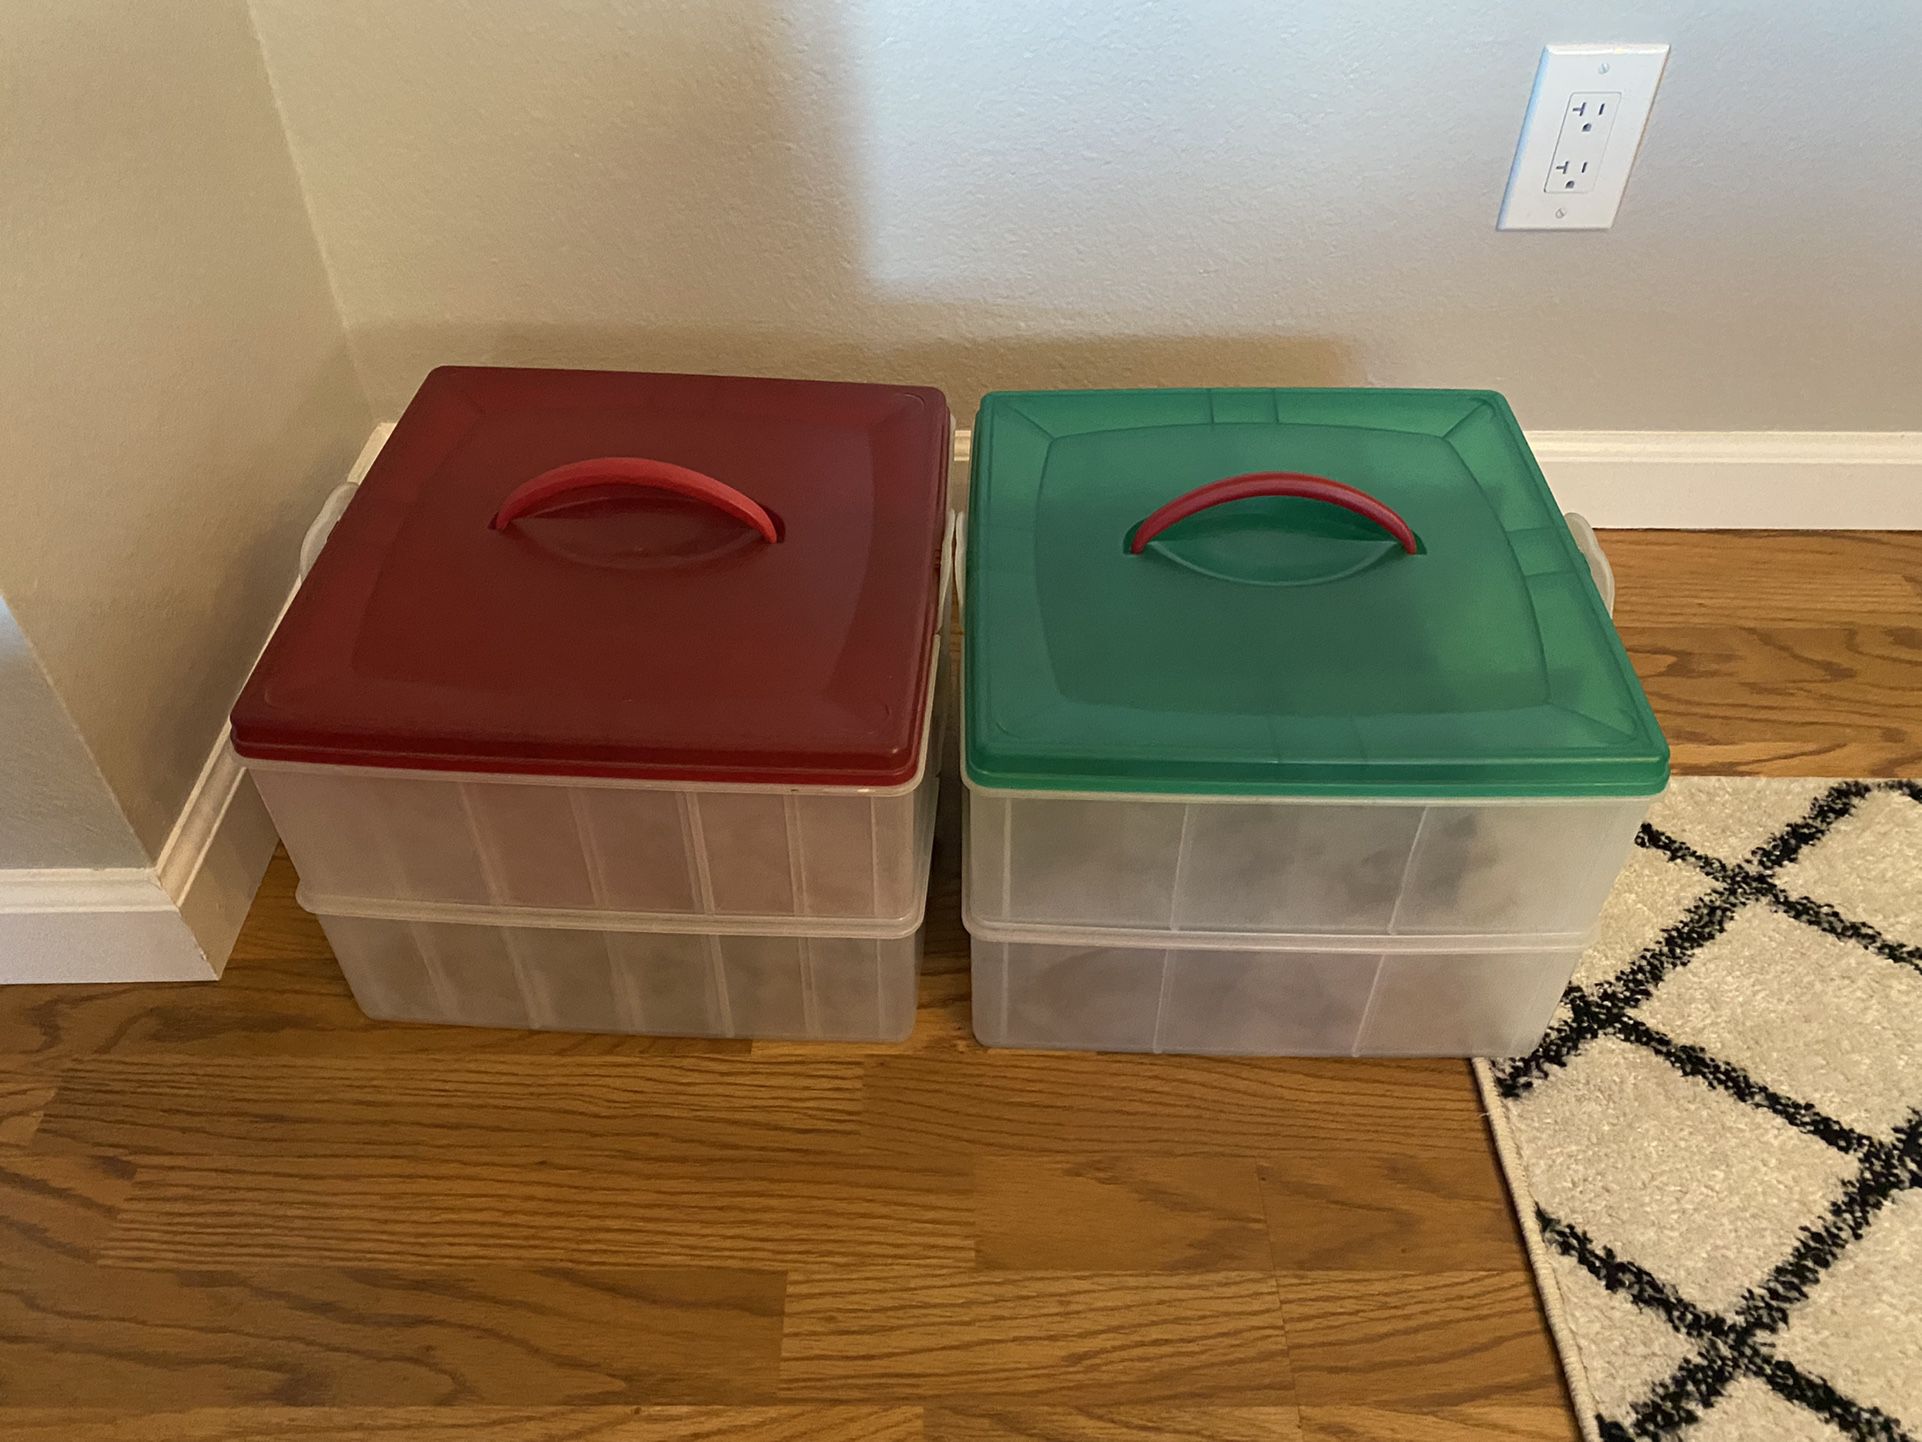 Snapware Snap N' Stack Square 3 Tier Seasonal Ornament Storage Container 13  x 13 in for Sale in Baldwin Park, CA - OfferUp